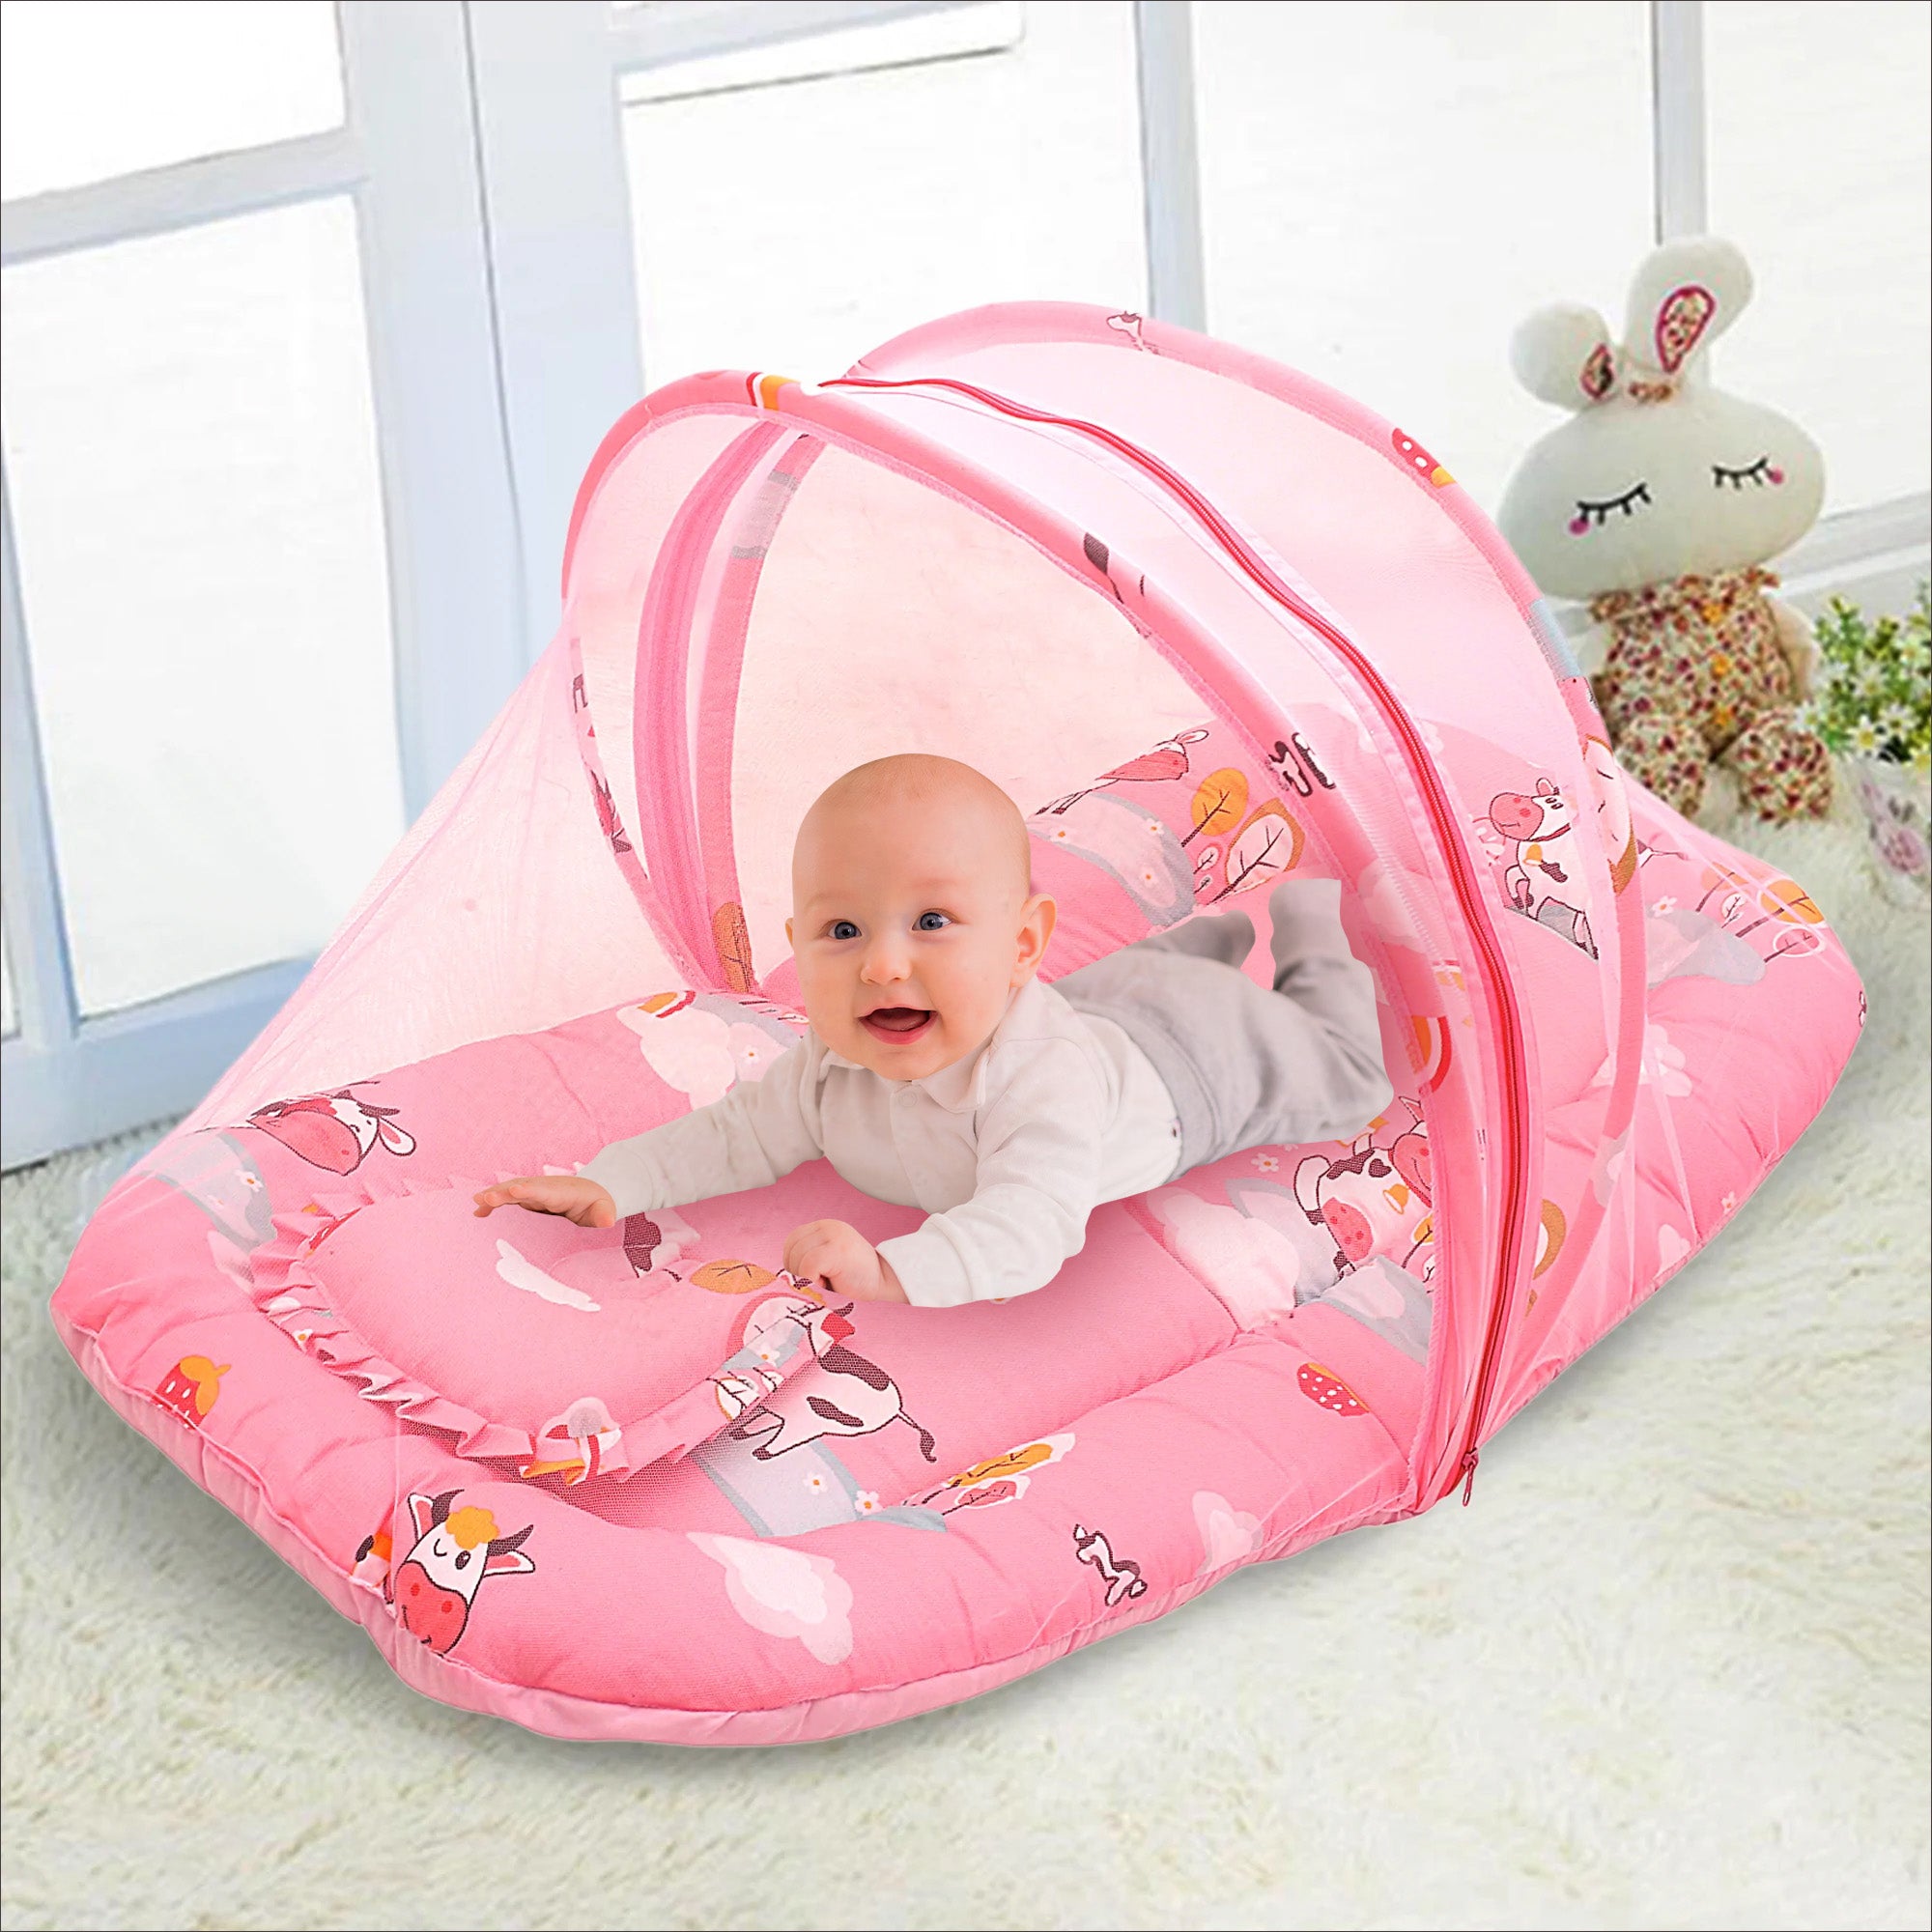 Mosquito Net Tent Mattress Set With Neck Pillow Milkaholic Peach - Baby Moo